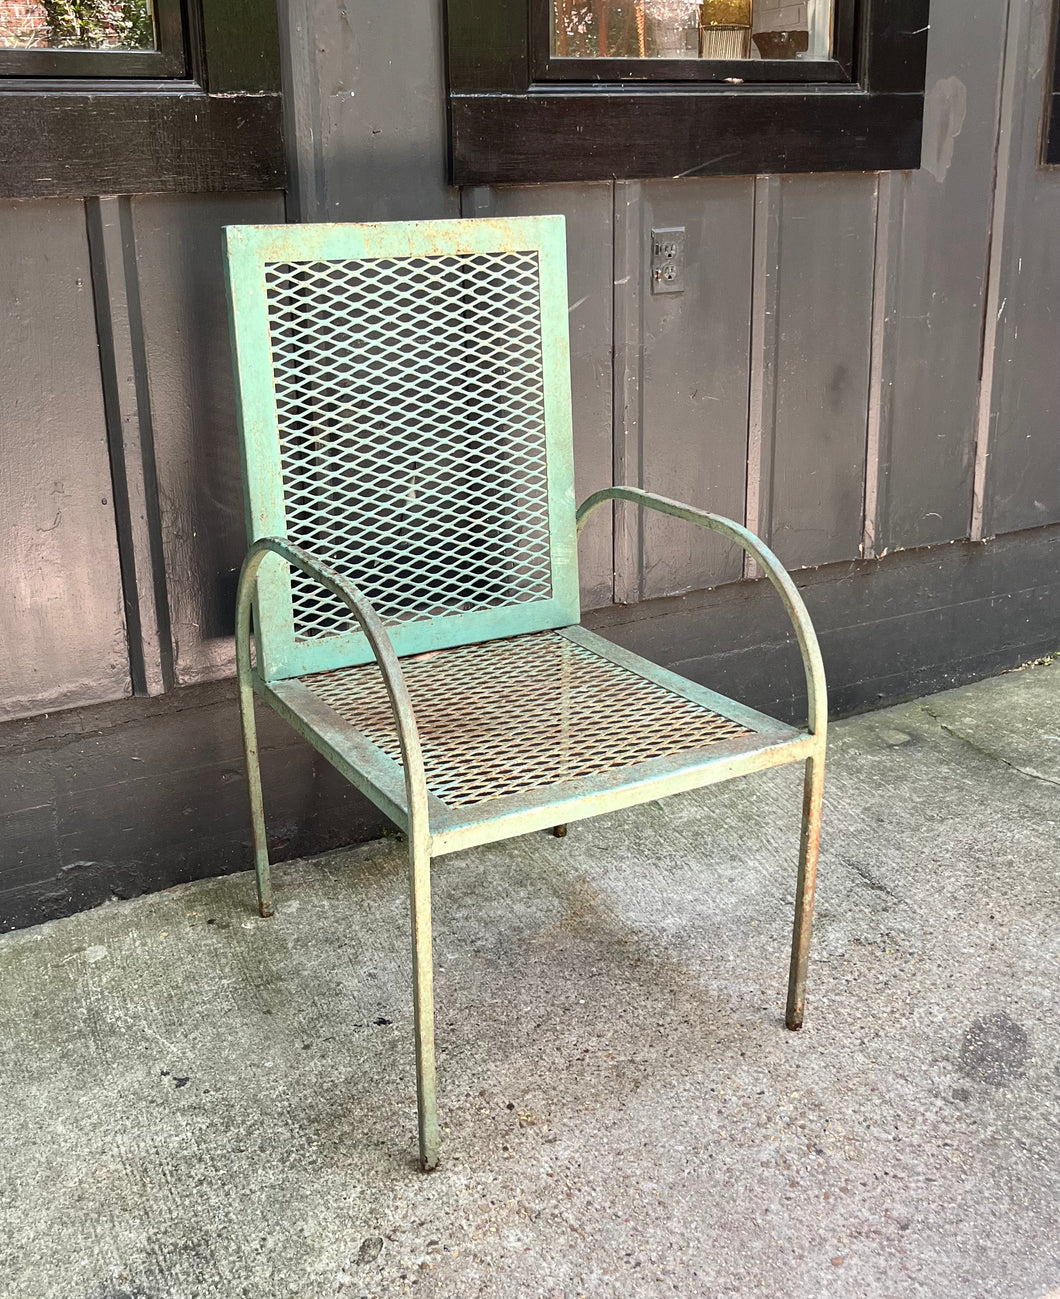 midcentury patio chair / 1940s Extra-large Green Wrought Iron Patio Chair